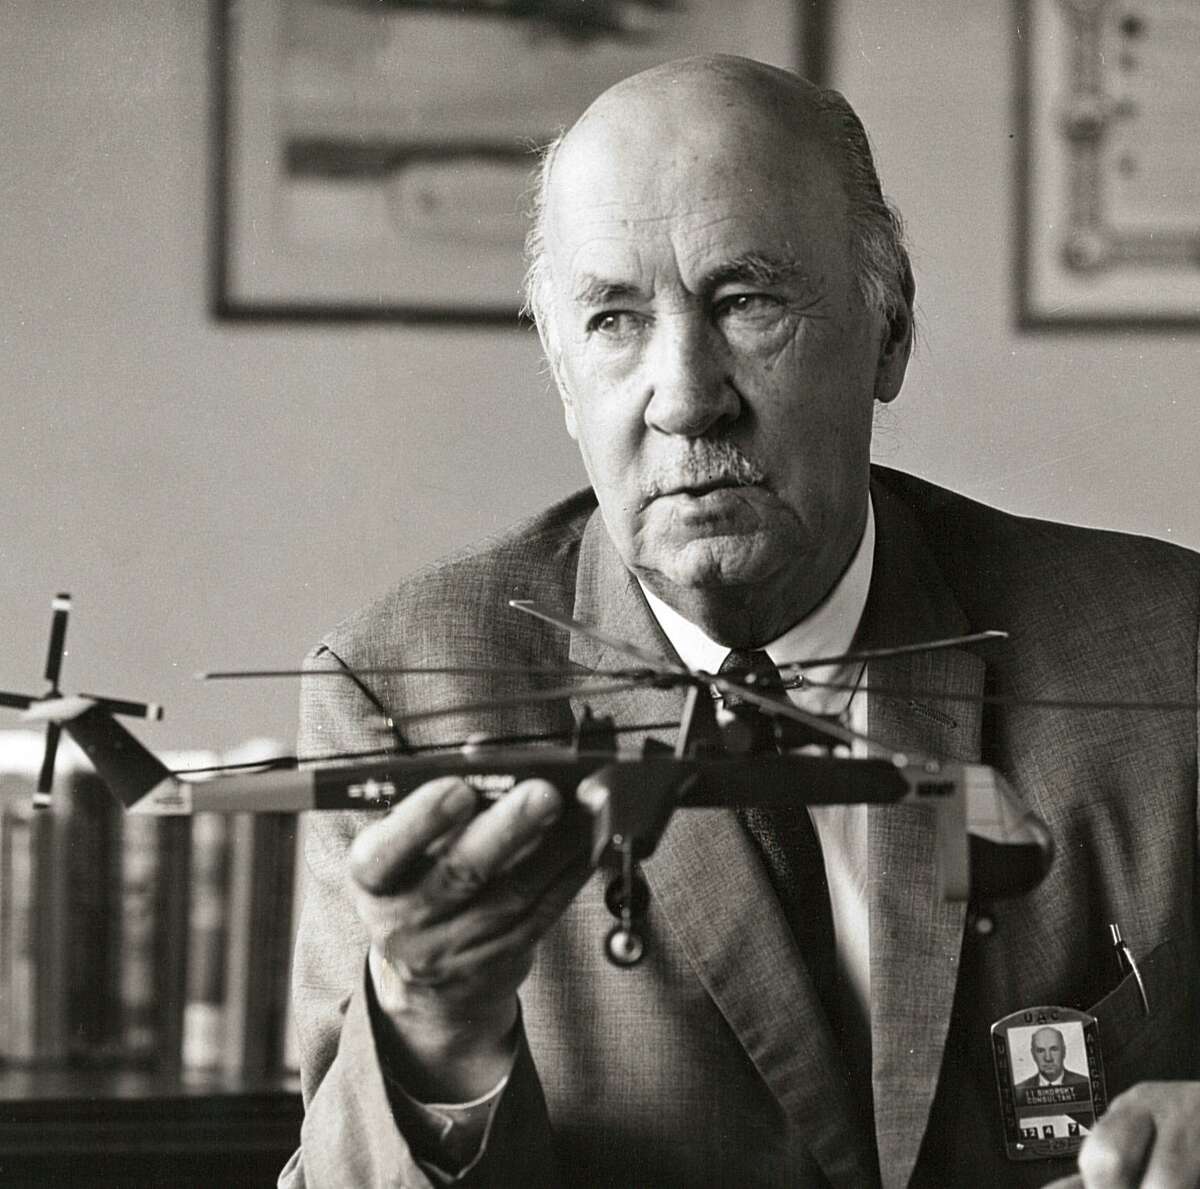 An undated file photo of Igor Sikorsky (1889-1972), the Russian born aviation pioneer and founder of Stratford based Sikorsky Aircraft.